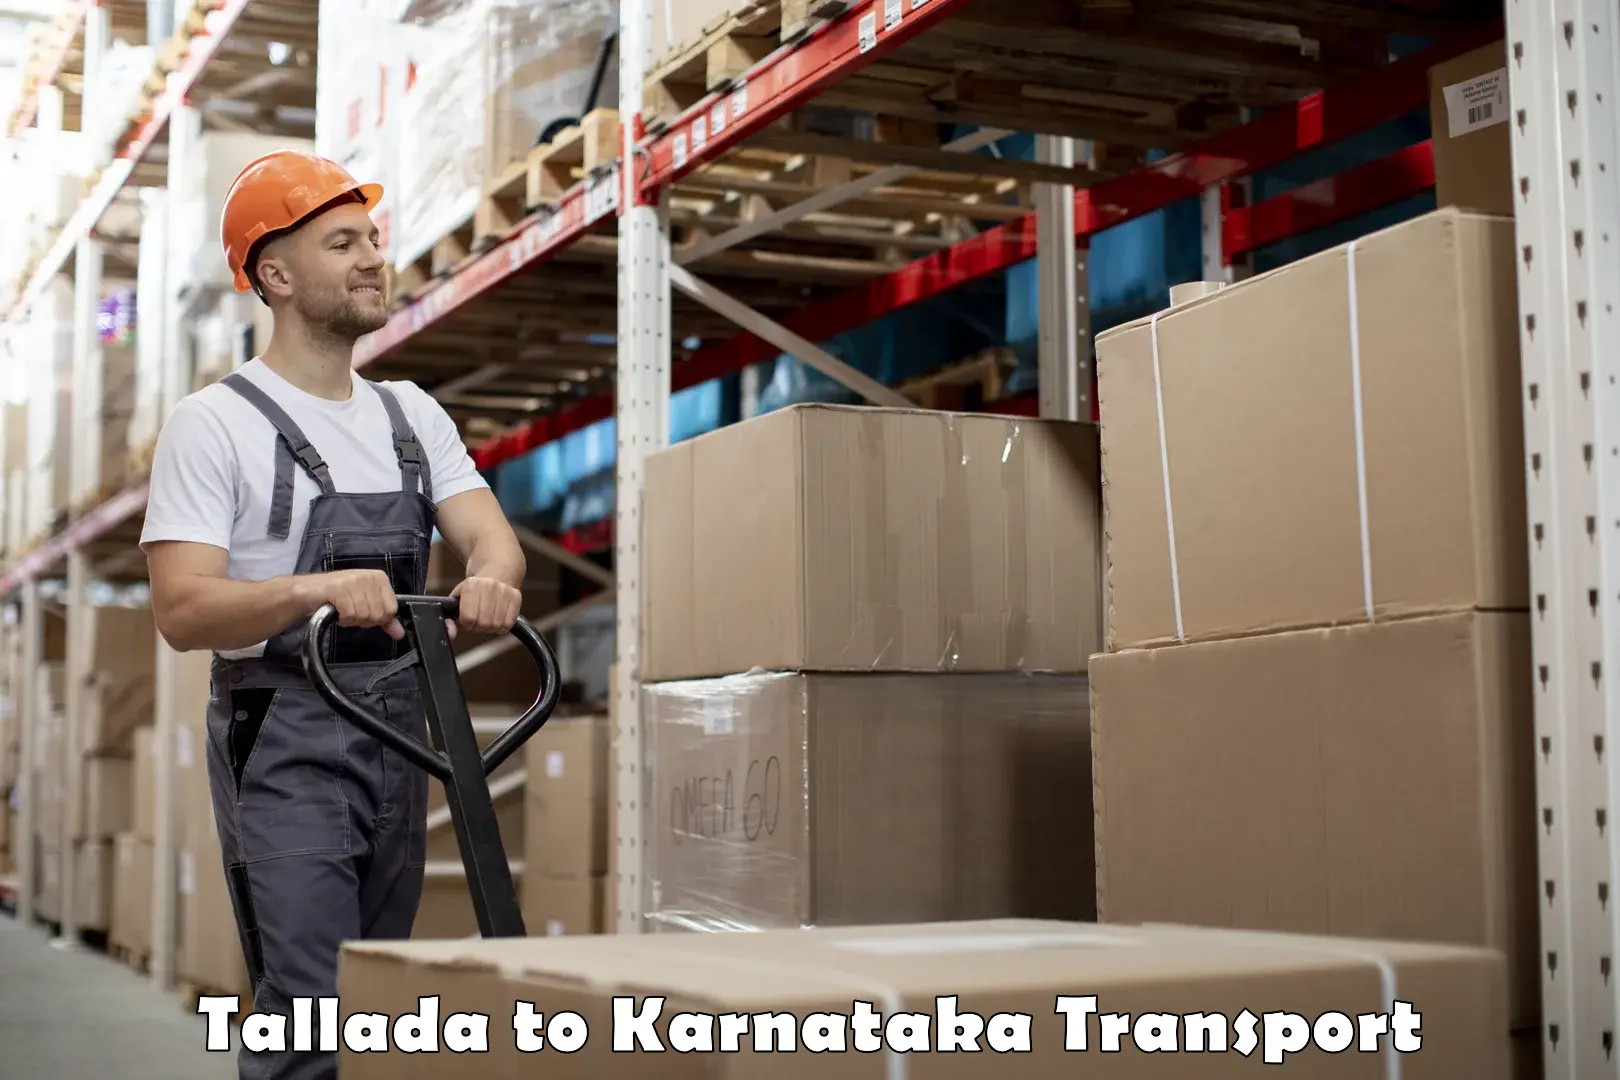 Road transport services in Tallada to Bagalkot